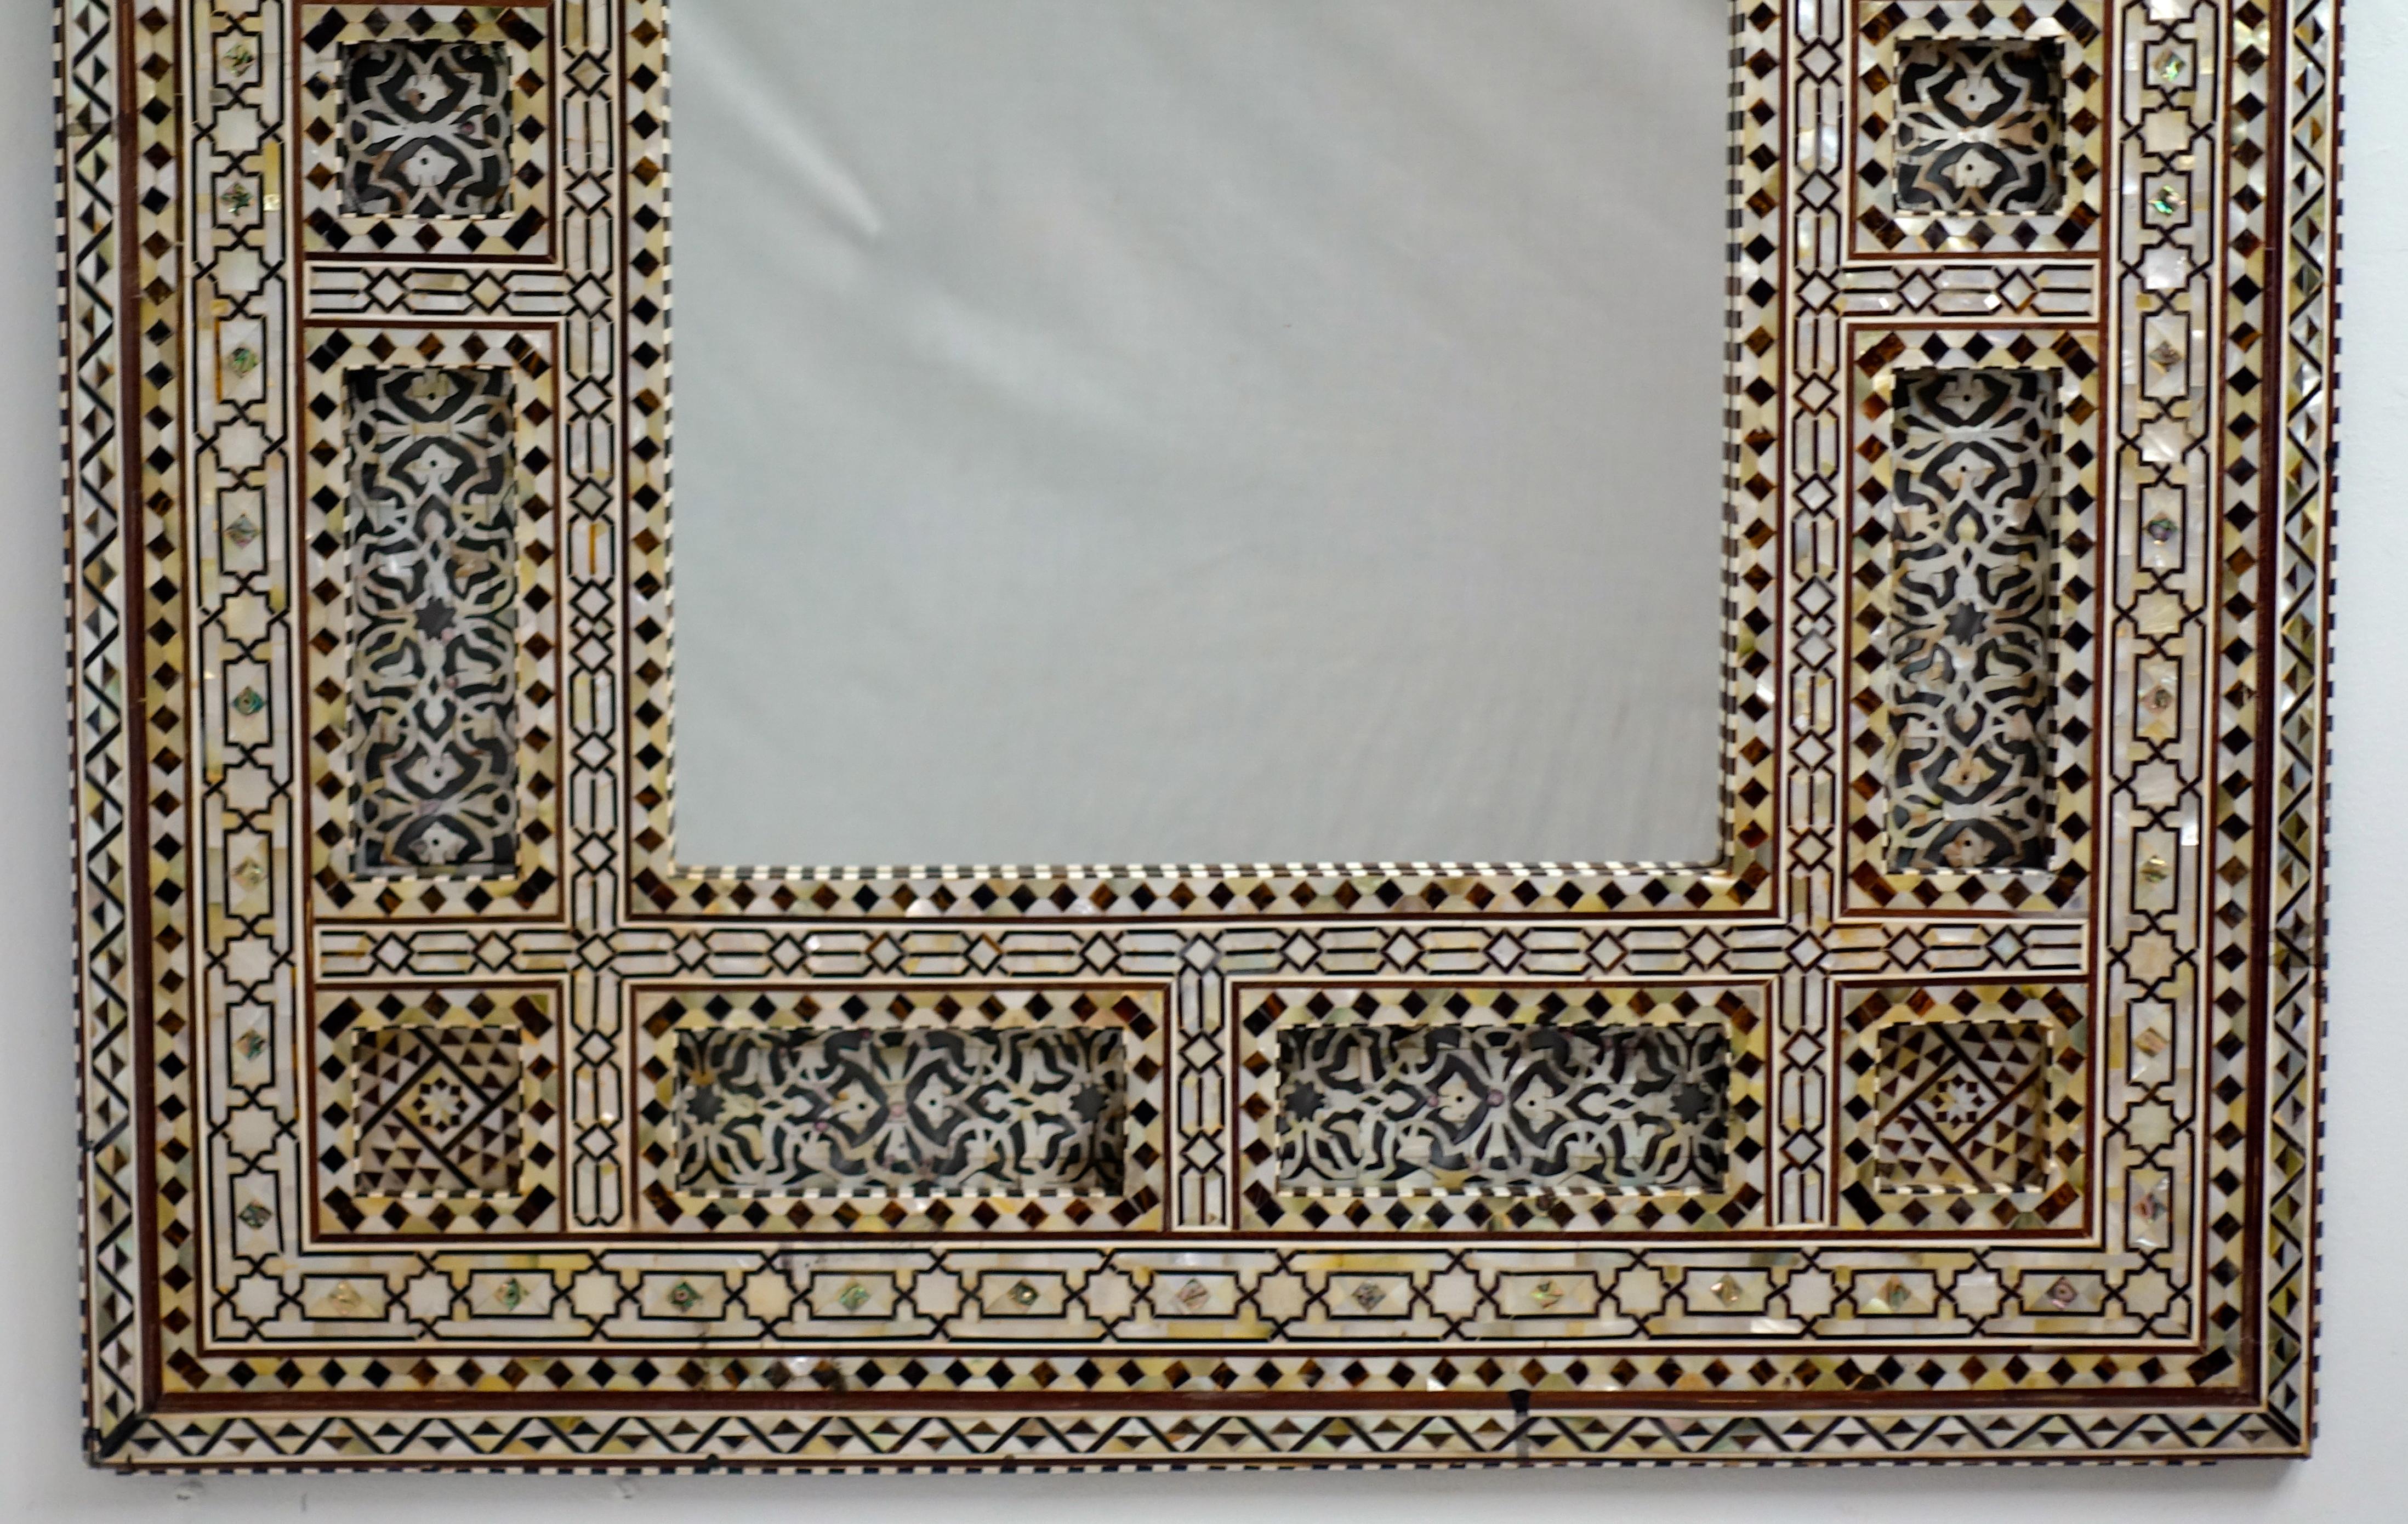 Splendid architectural and intricately decorated framed mirror from Syria.
The frame is inlaid with geometric designs of mother of peal, bone and horn.
20th century. 
